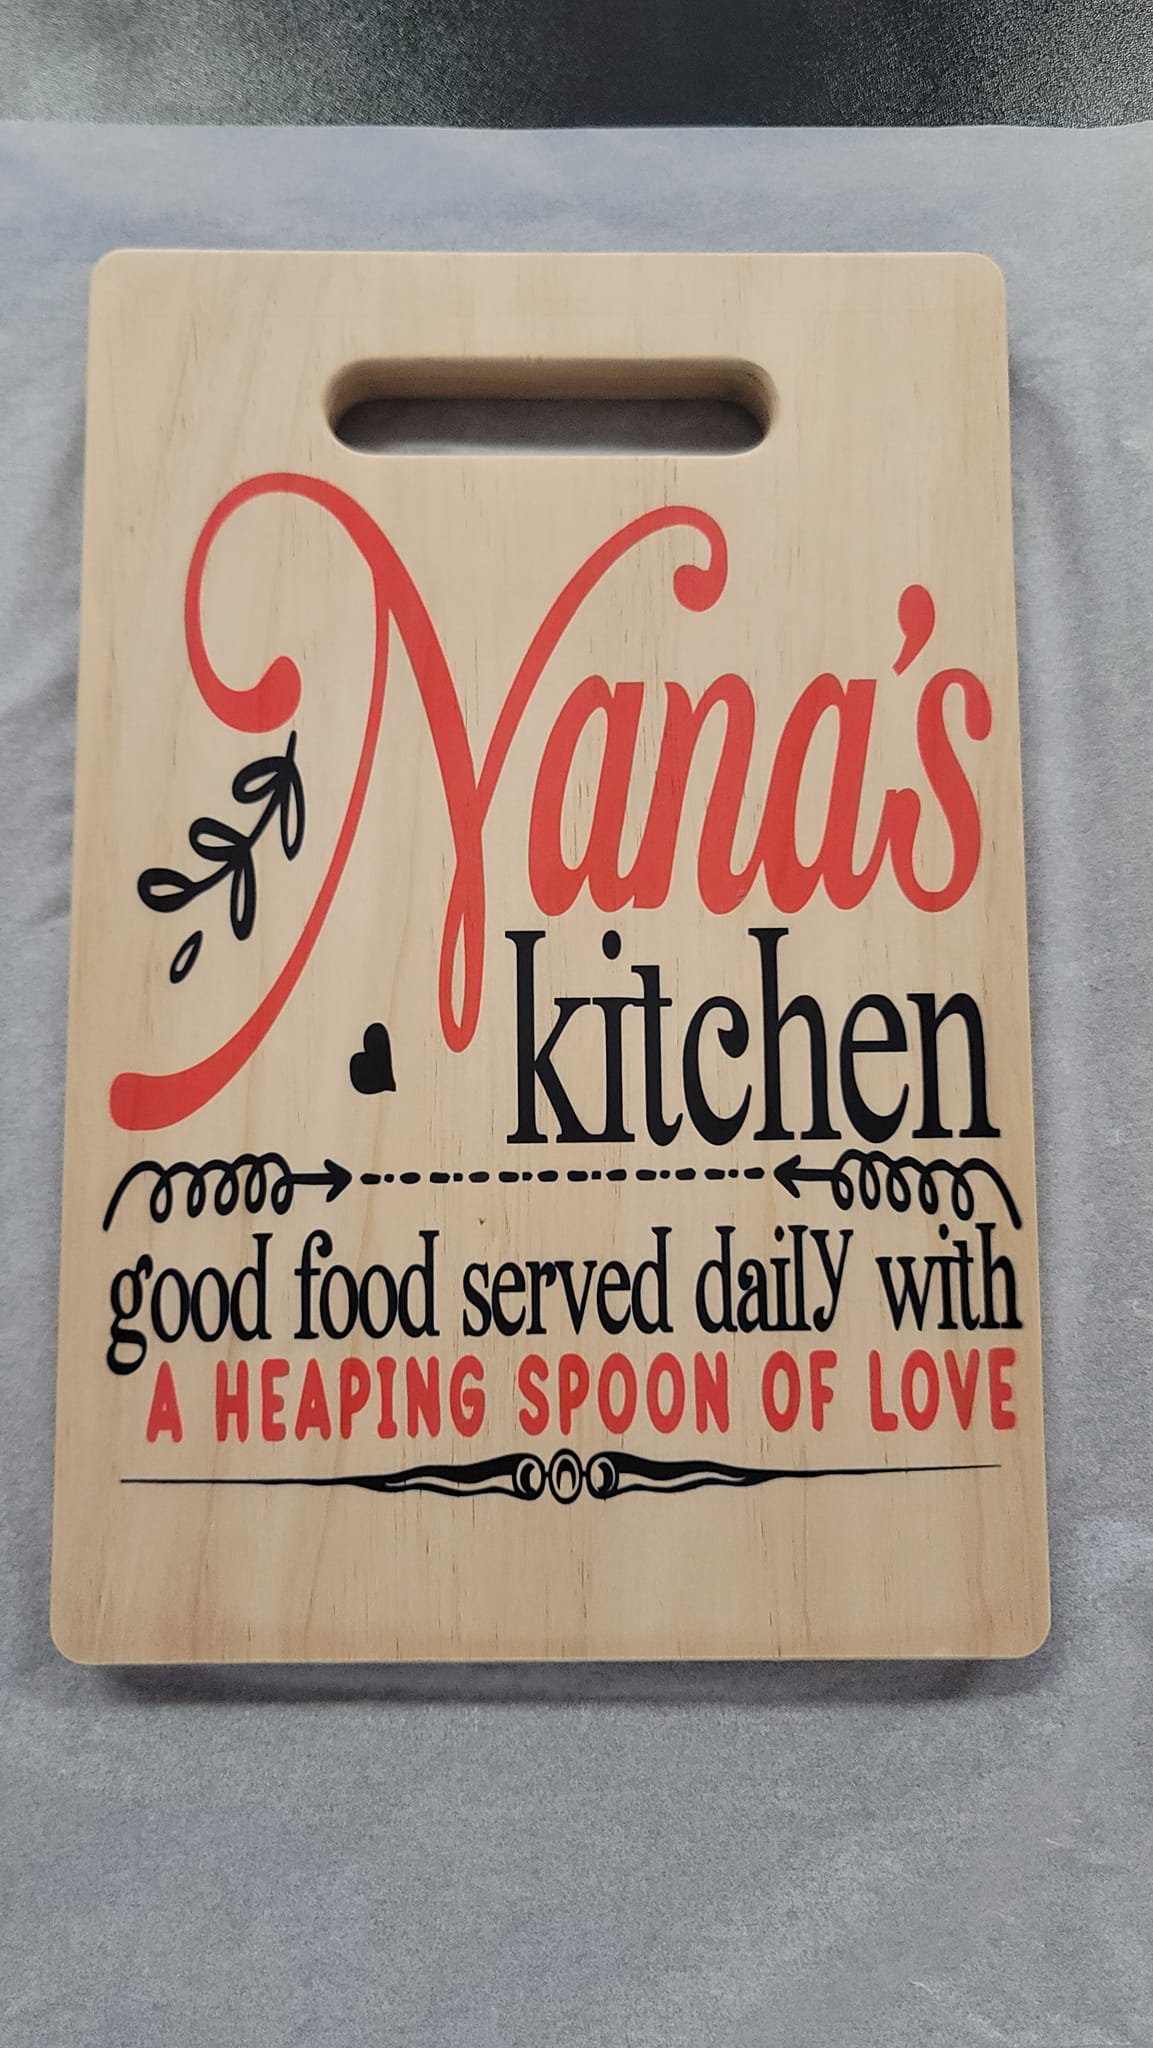 Kitchen open daily engraved cutting board